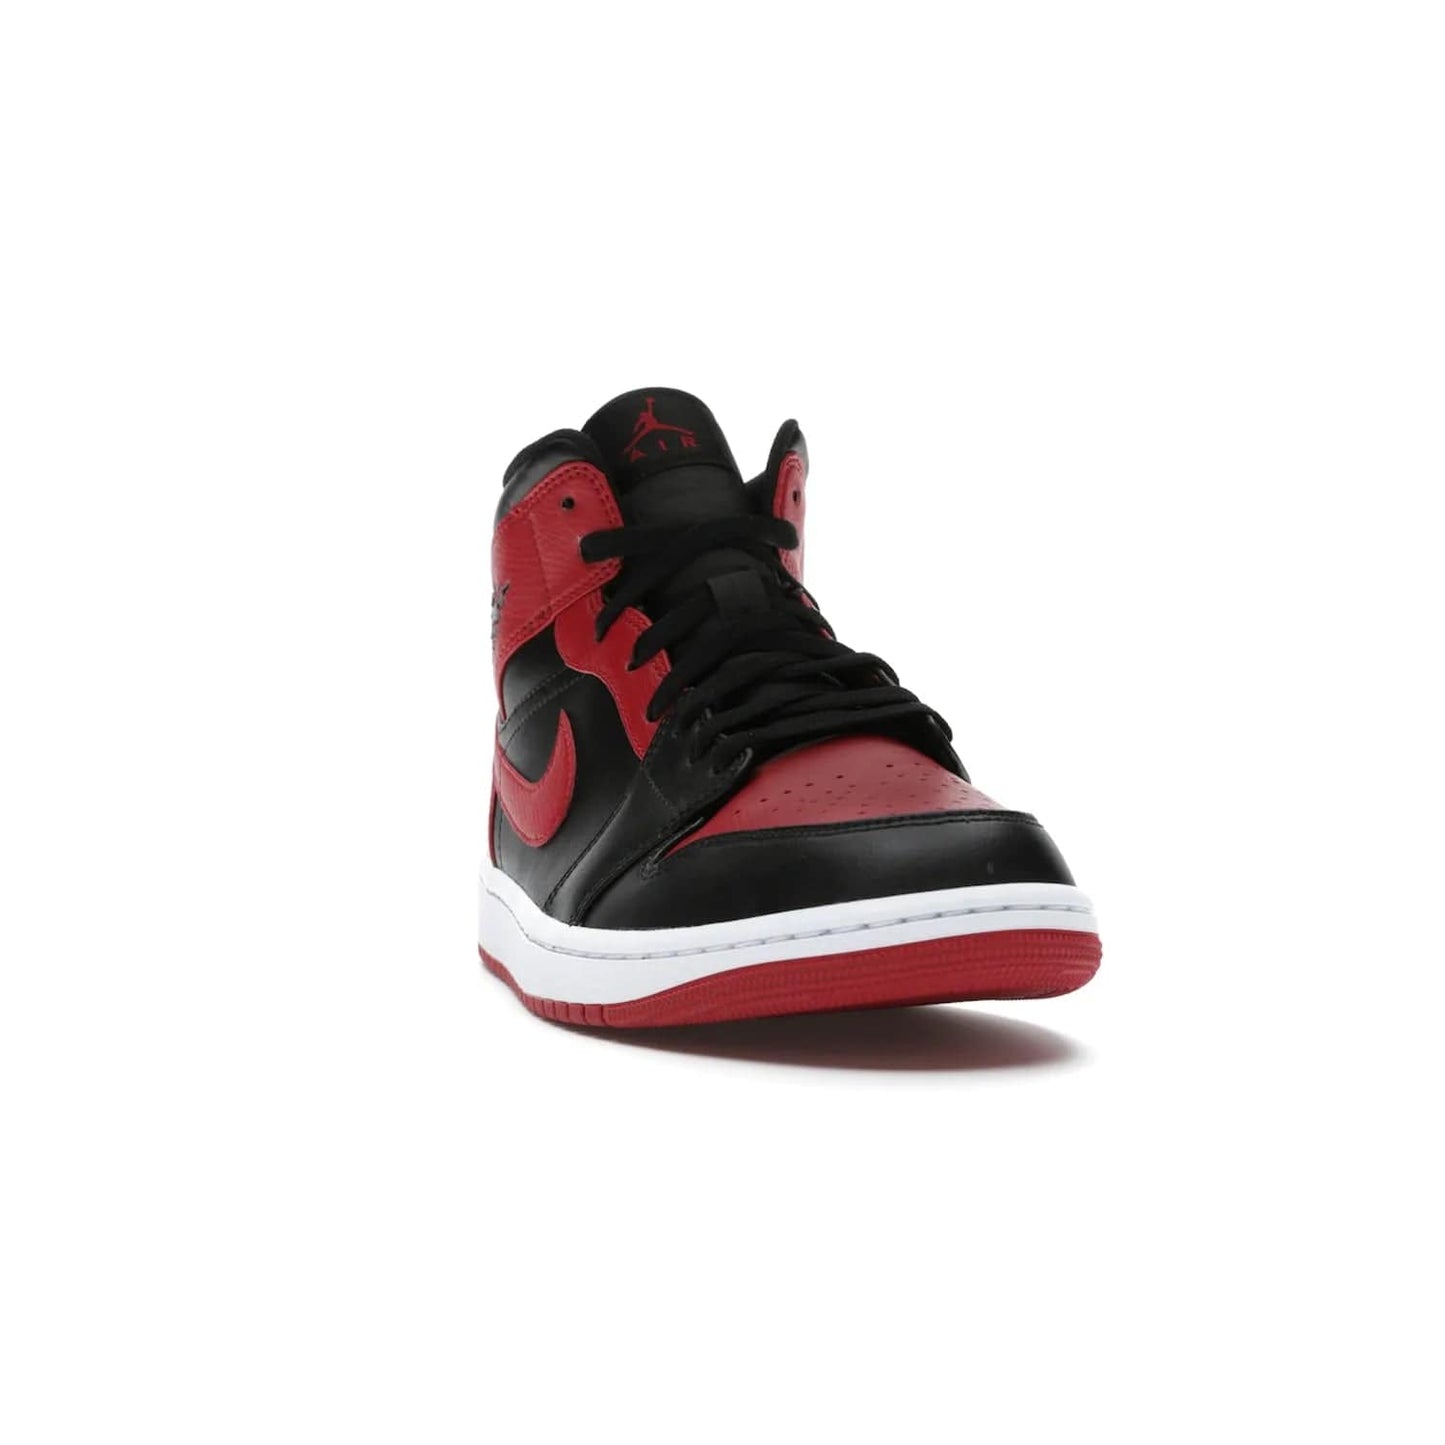 Jordan 1 Mid Banned (2020) - Image 8 - Only at www.BallersClubKickz.com - The Air Jordan 1 Mid Banned (2020) brings a modern twist to the classic Banned colorway. Features full-grain black and red leather uppers, red leather around the toe, collar, heel, & Swoosh. Release November 2021 for $110.